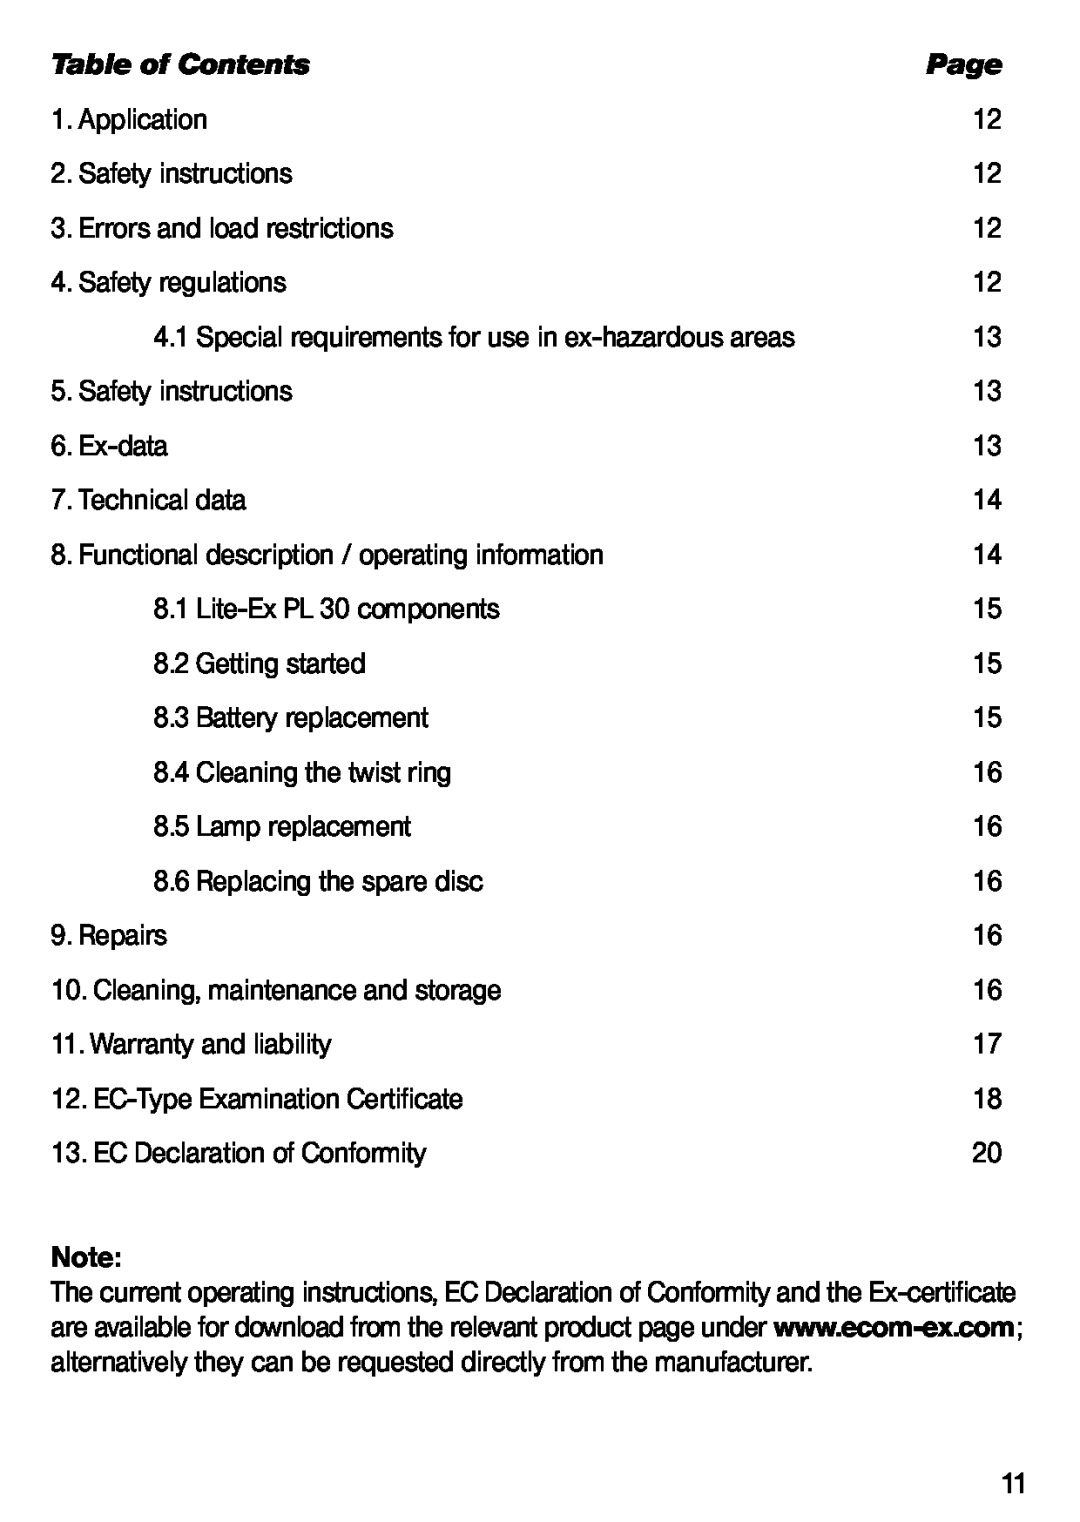 Ecom Instruments Lite-Ex PL 30 operating instructions Table of Contents, Page 